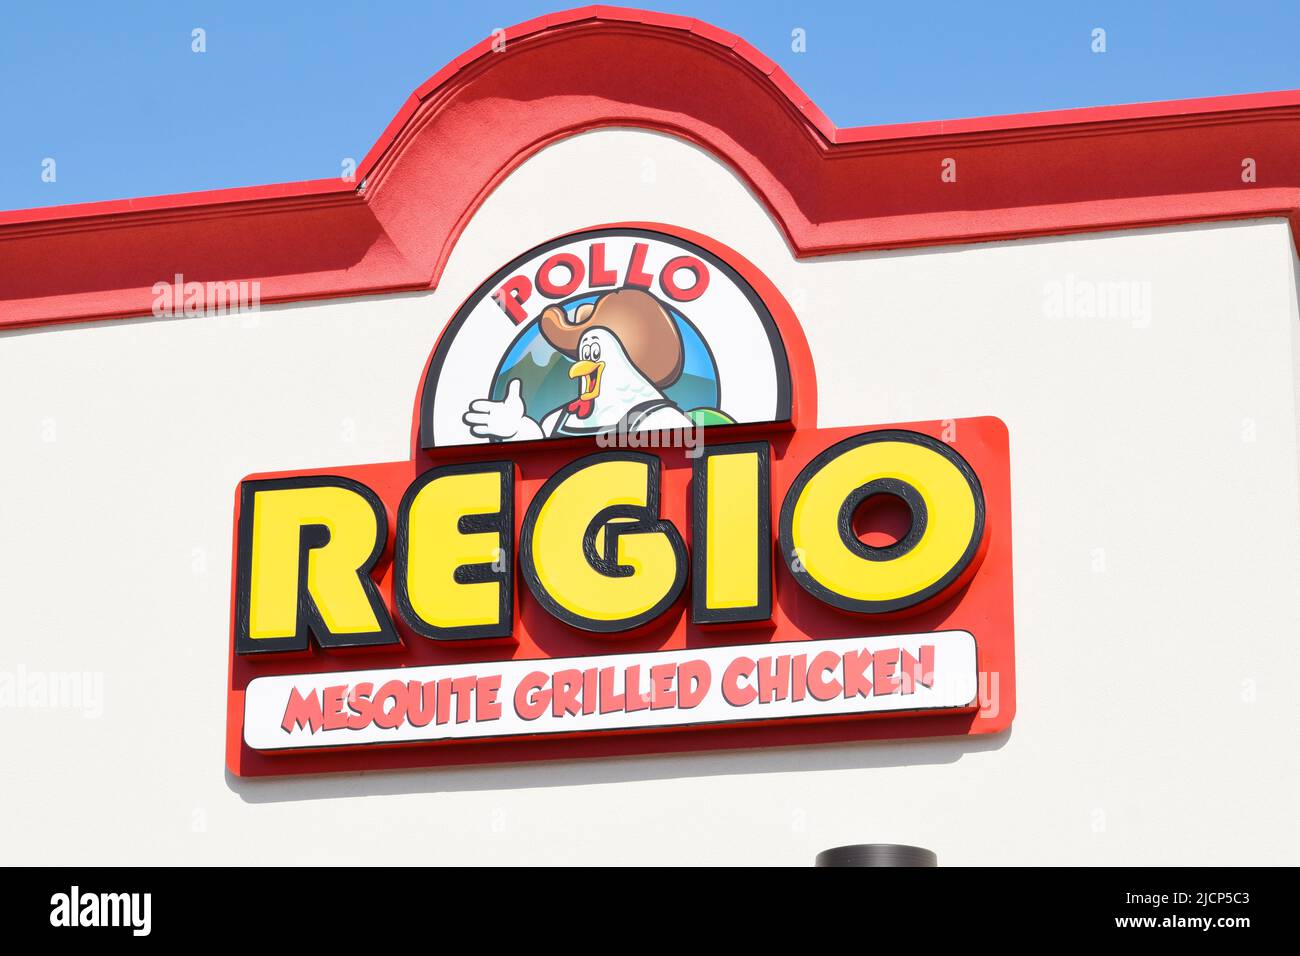 Close up of a Pollo Regio Mesquite Grilled Chicken restaurant sign Stock Photo